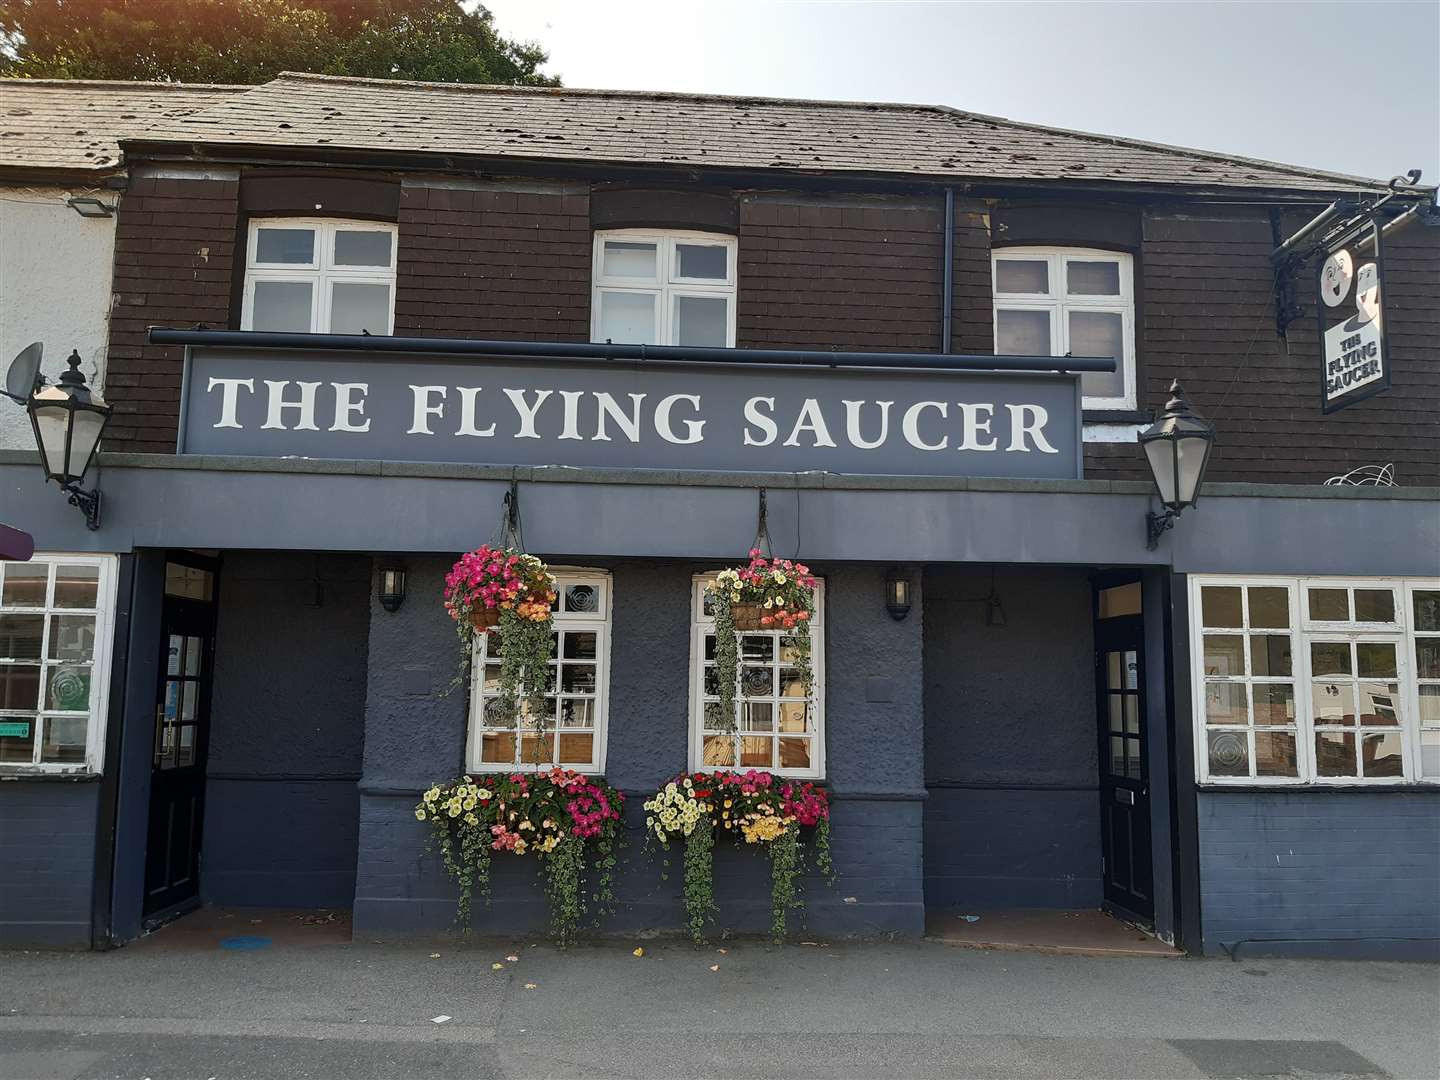 The Flying Saucer pub at Hempstead took the licence from the former Shipwright Arms in Brompton when slum clearances continued in the 1950s